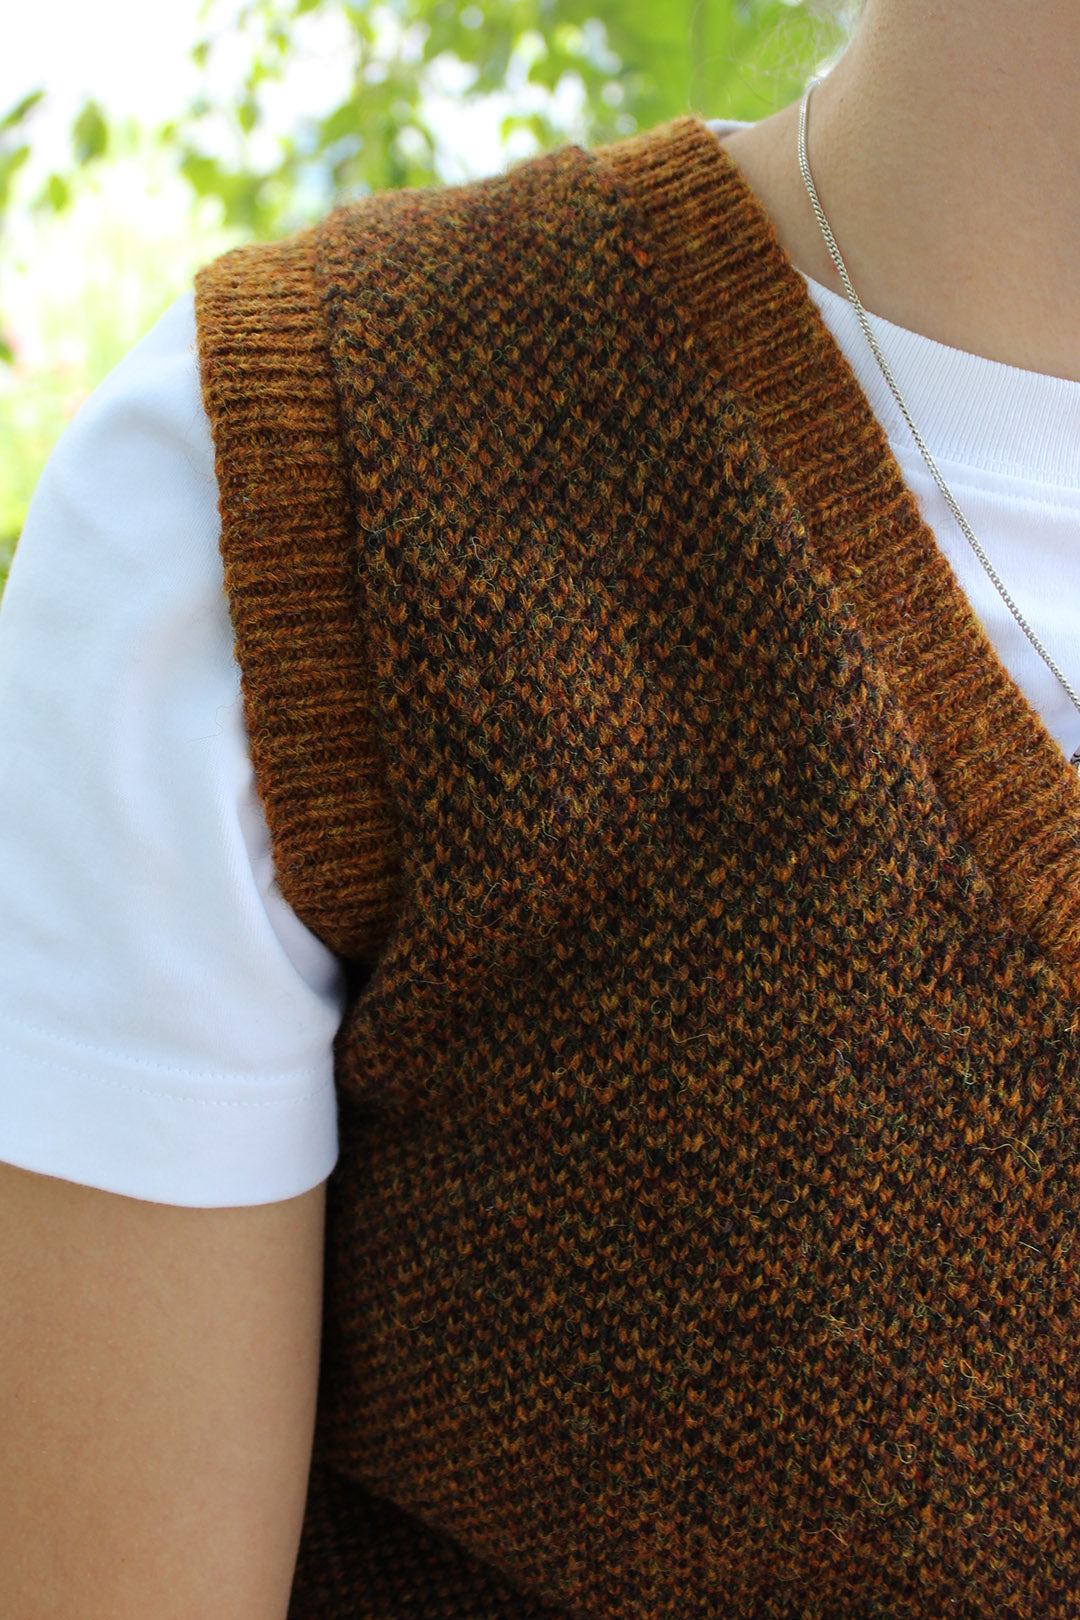 Shetland knitted tank top in burnt umber, with a v-neck. Close up detail.